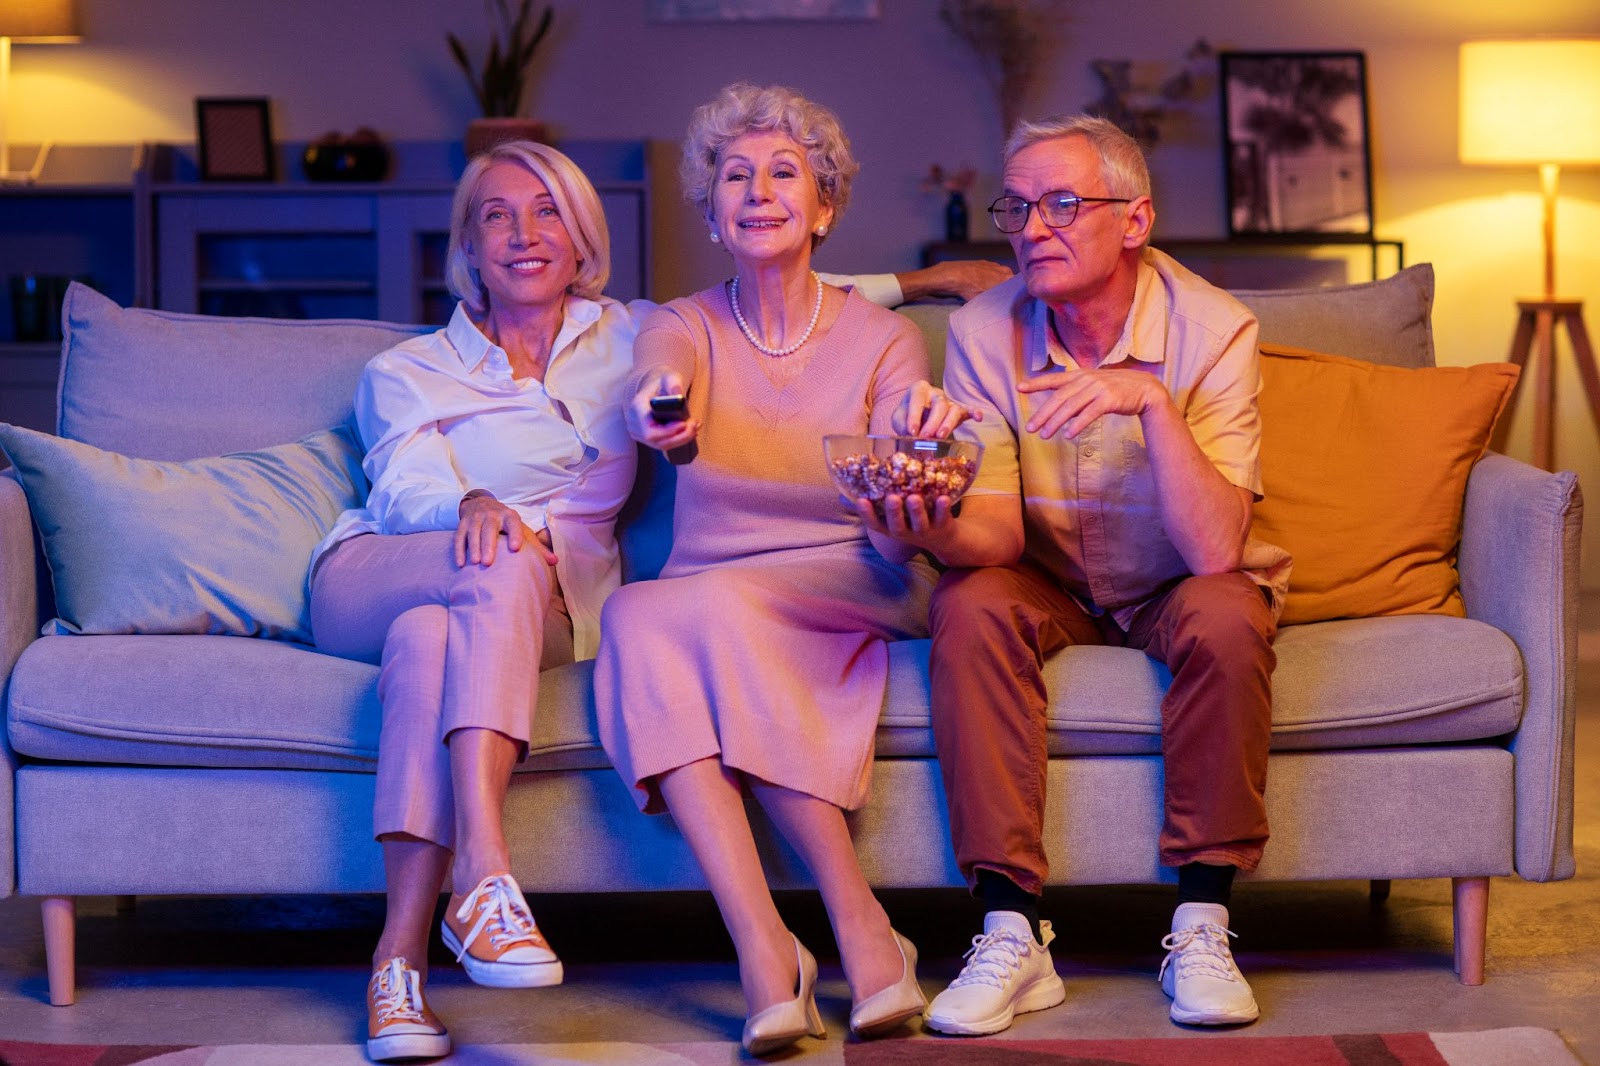 Three elderly people sitting on a couch and watching TV